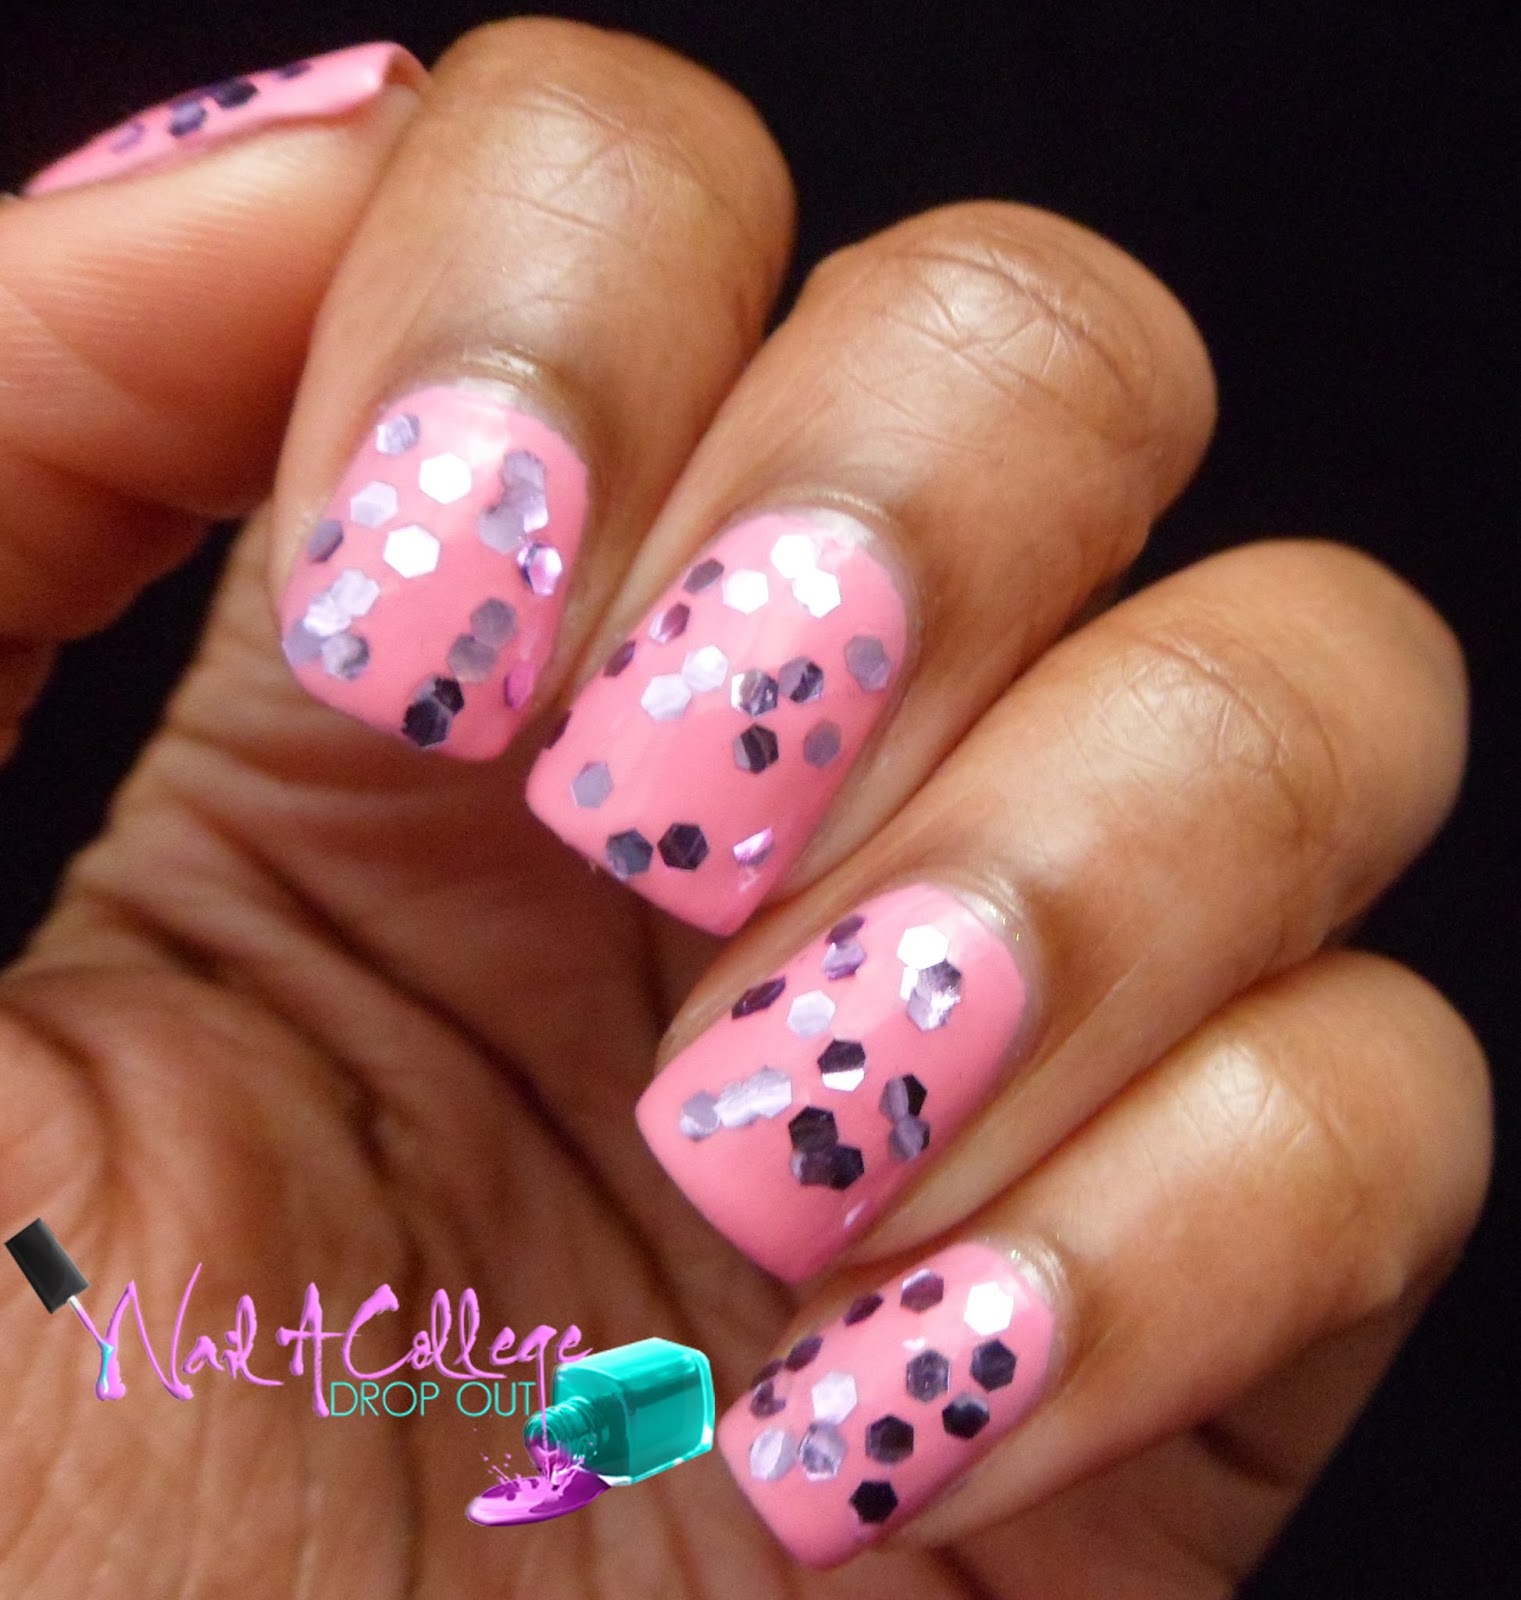 Nail A College Drop Out: Barielle Gentle Breeze & Bling It On Swatch ...